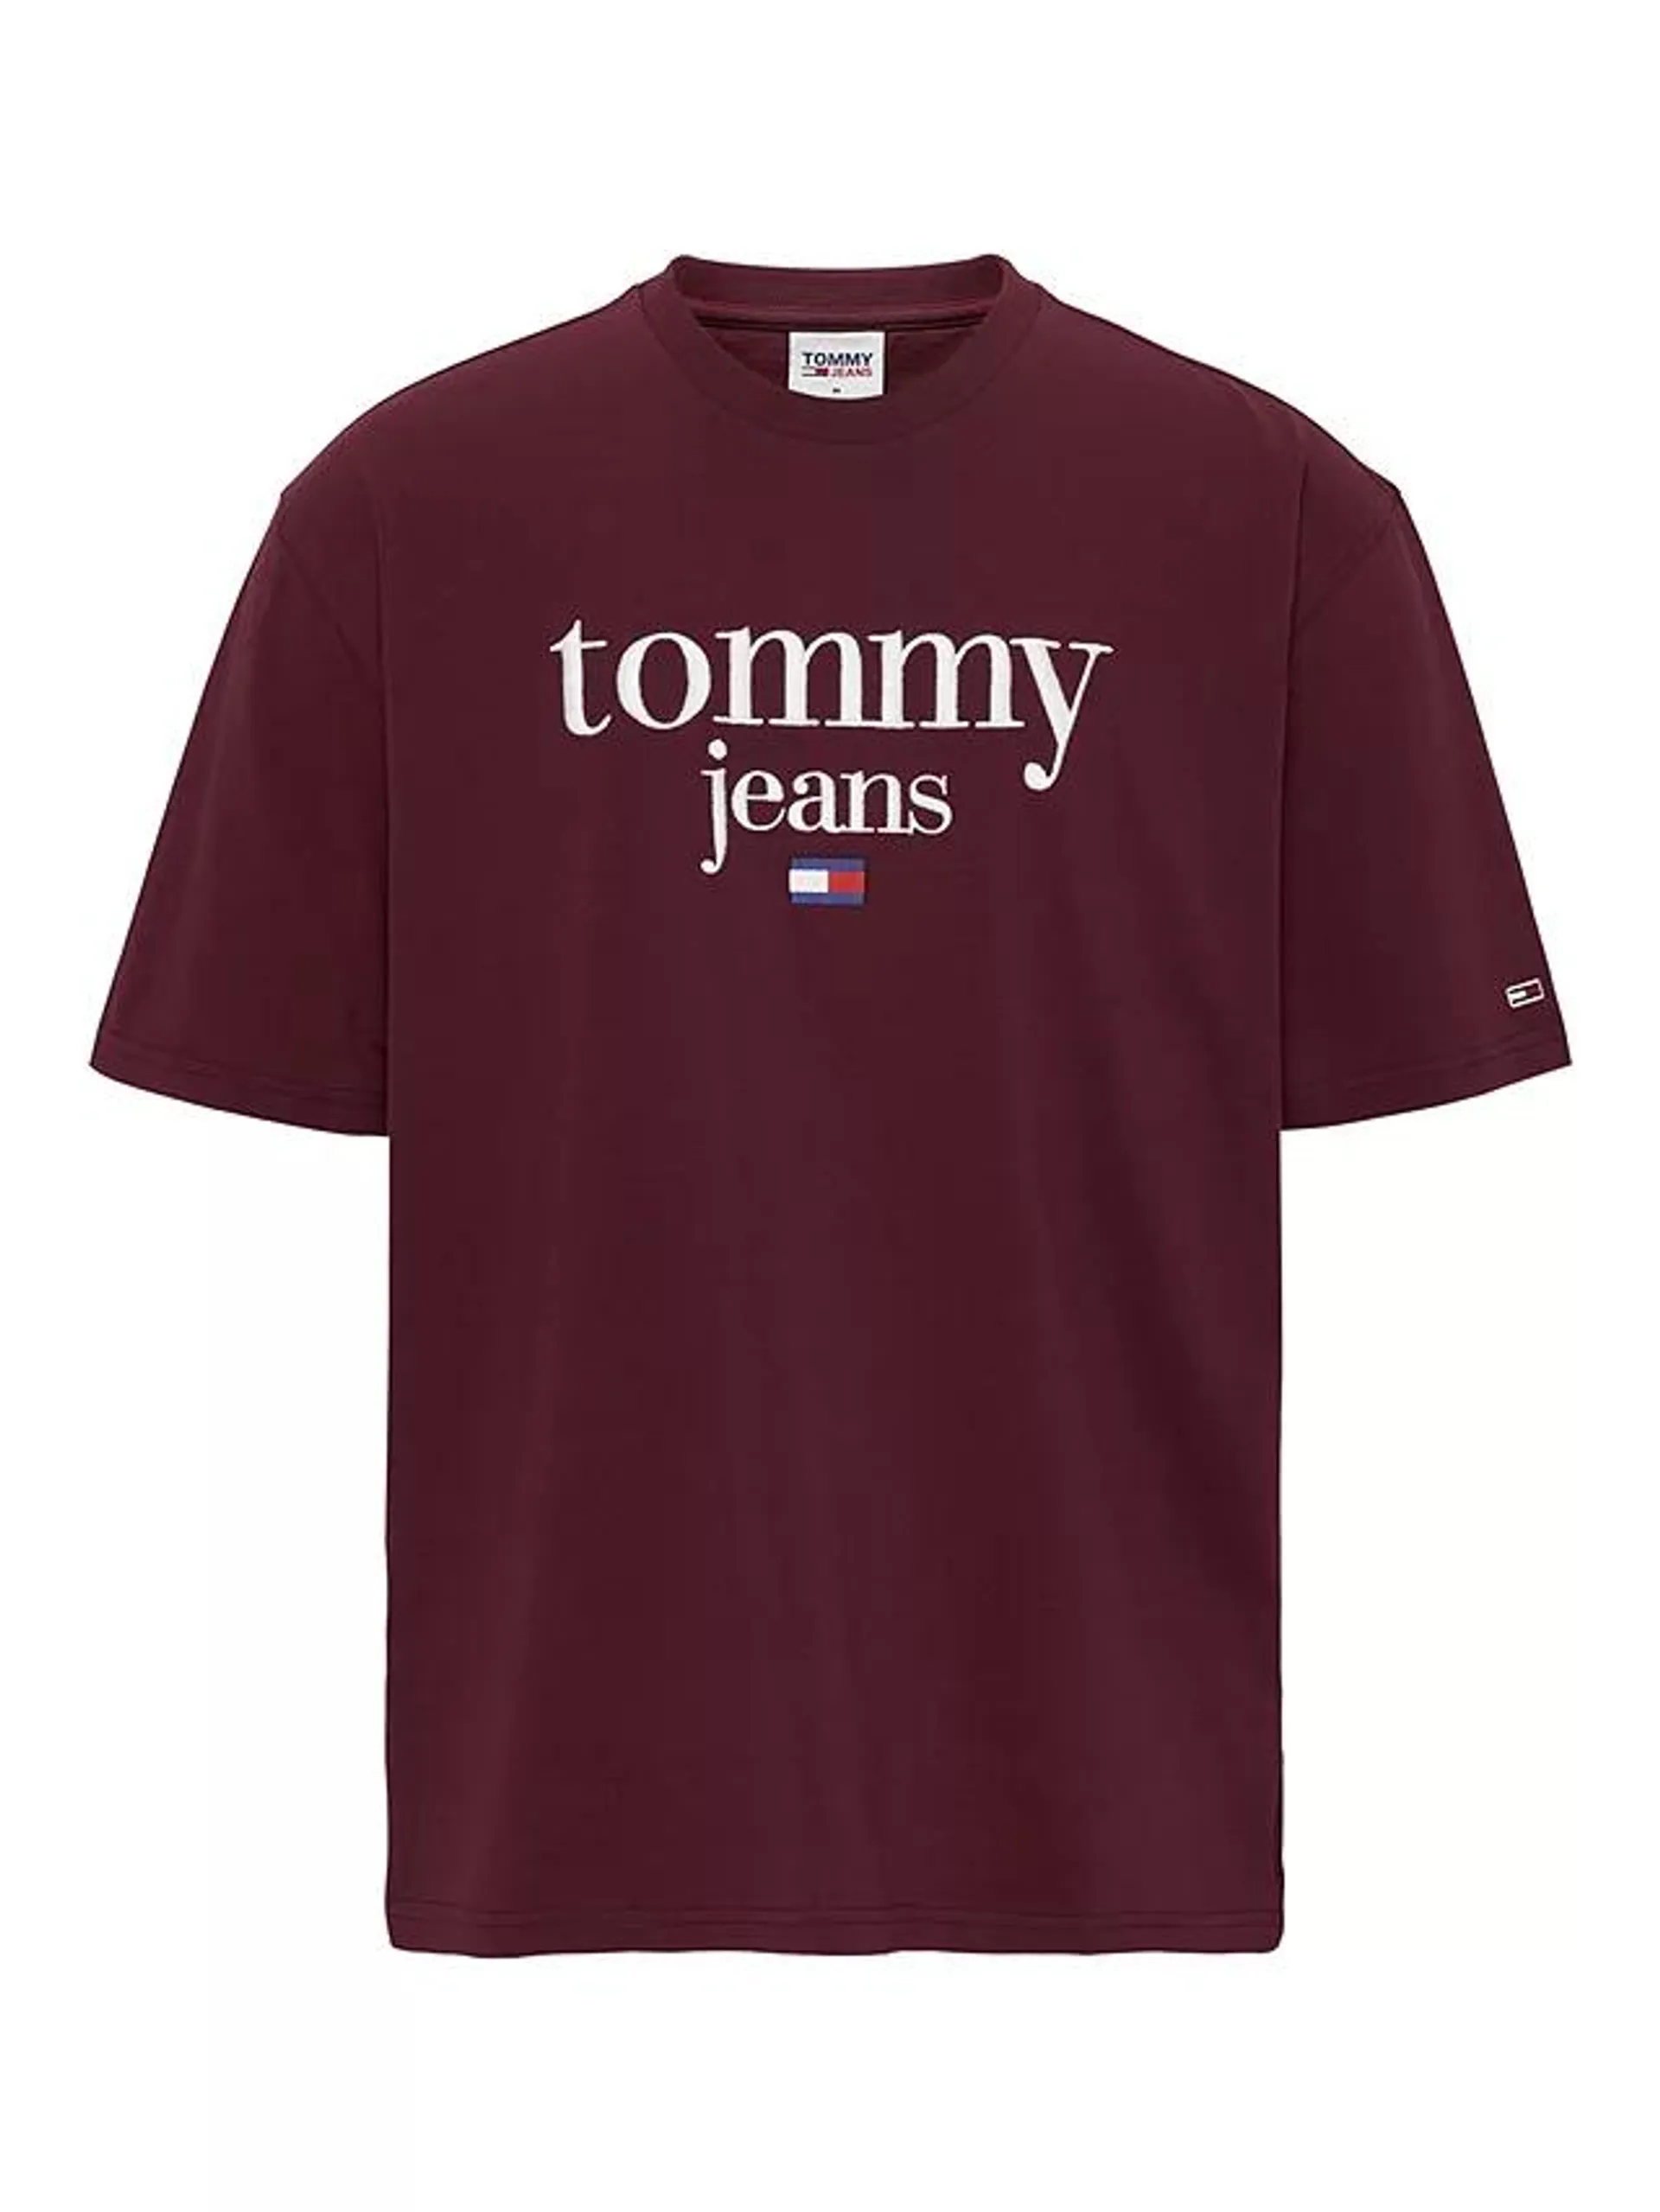 Tommy Jeans Classic Modern Logo T-Shirt, Deep Rouge